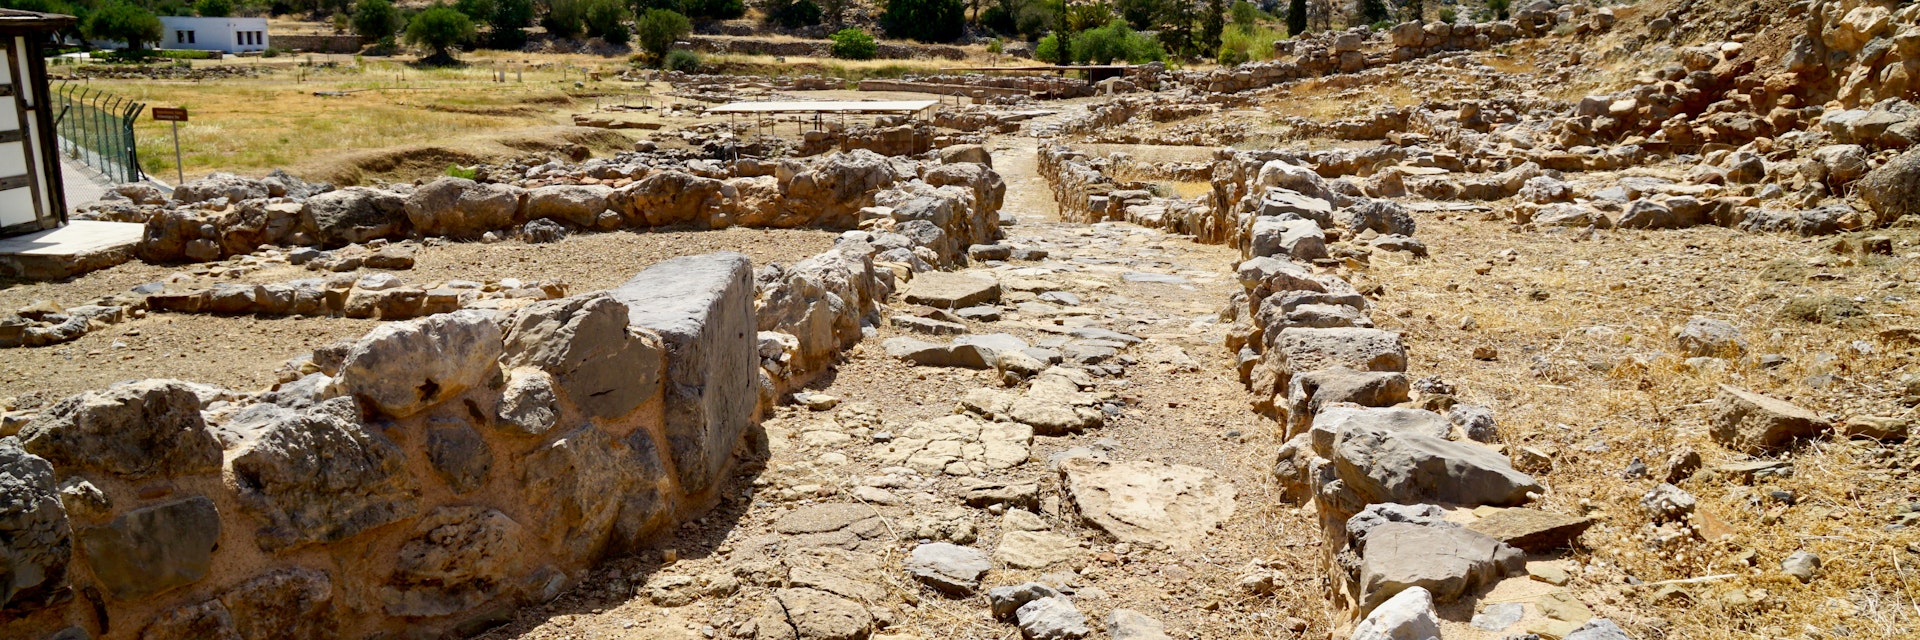 Zakros Minoan Palast Site, Crete, Greece was the fourth largest on the island, but with a strategic important position on the west coast for the trade with Egypt and near east.